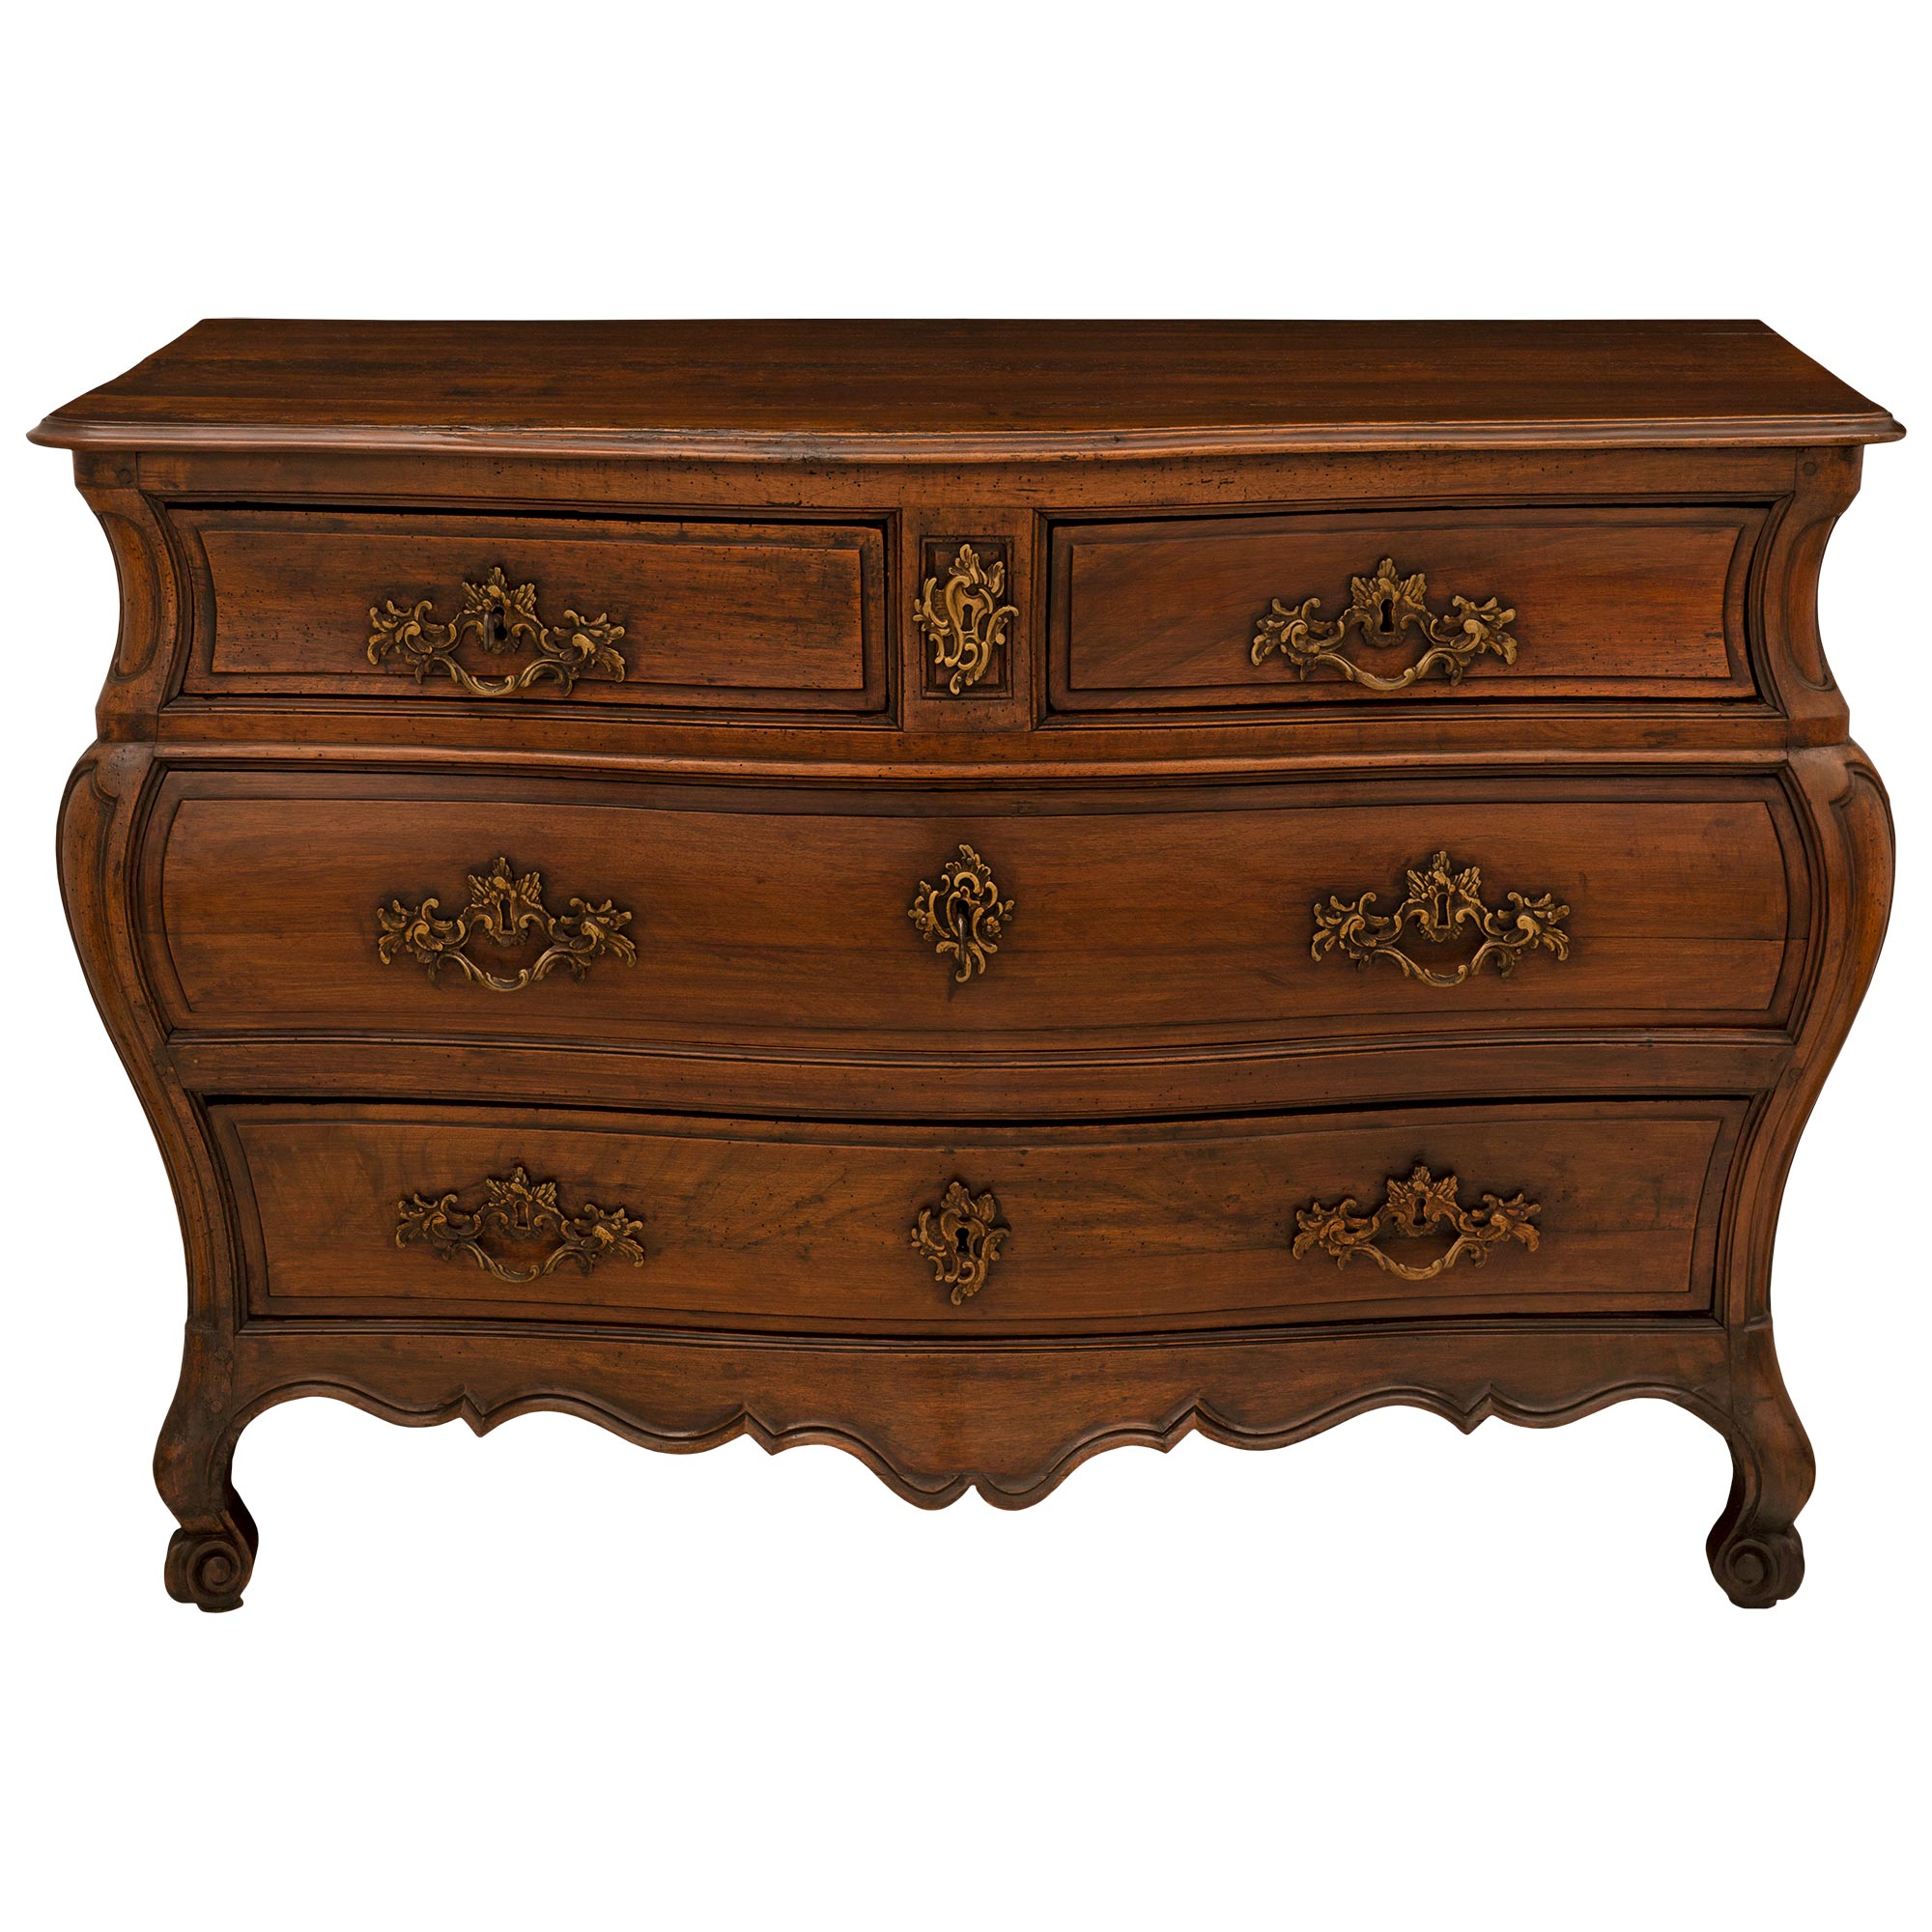 French 18th Century Louis XV Period Walnut Commode Bordelaise For Sale